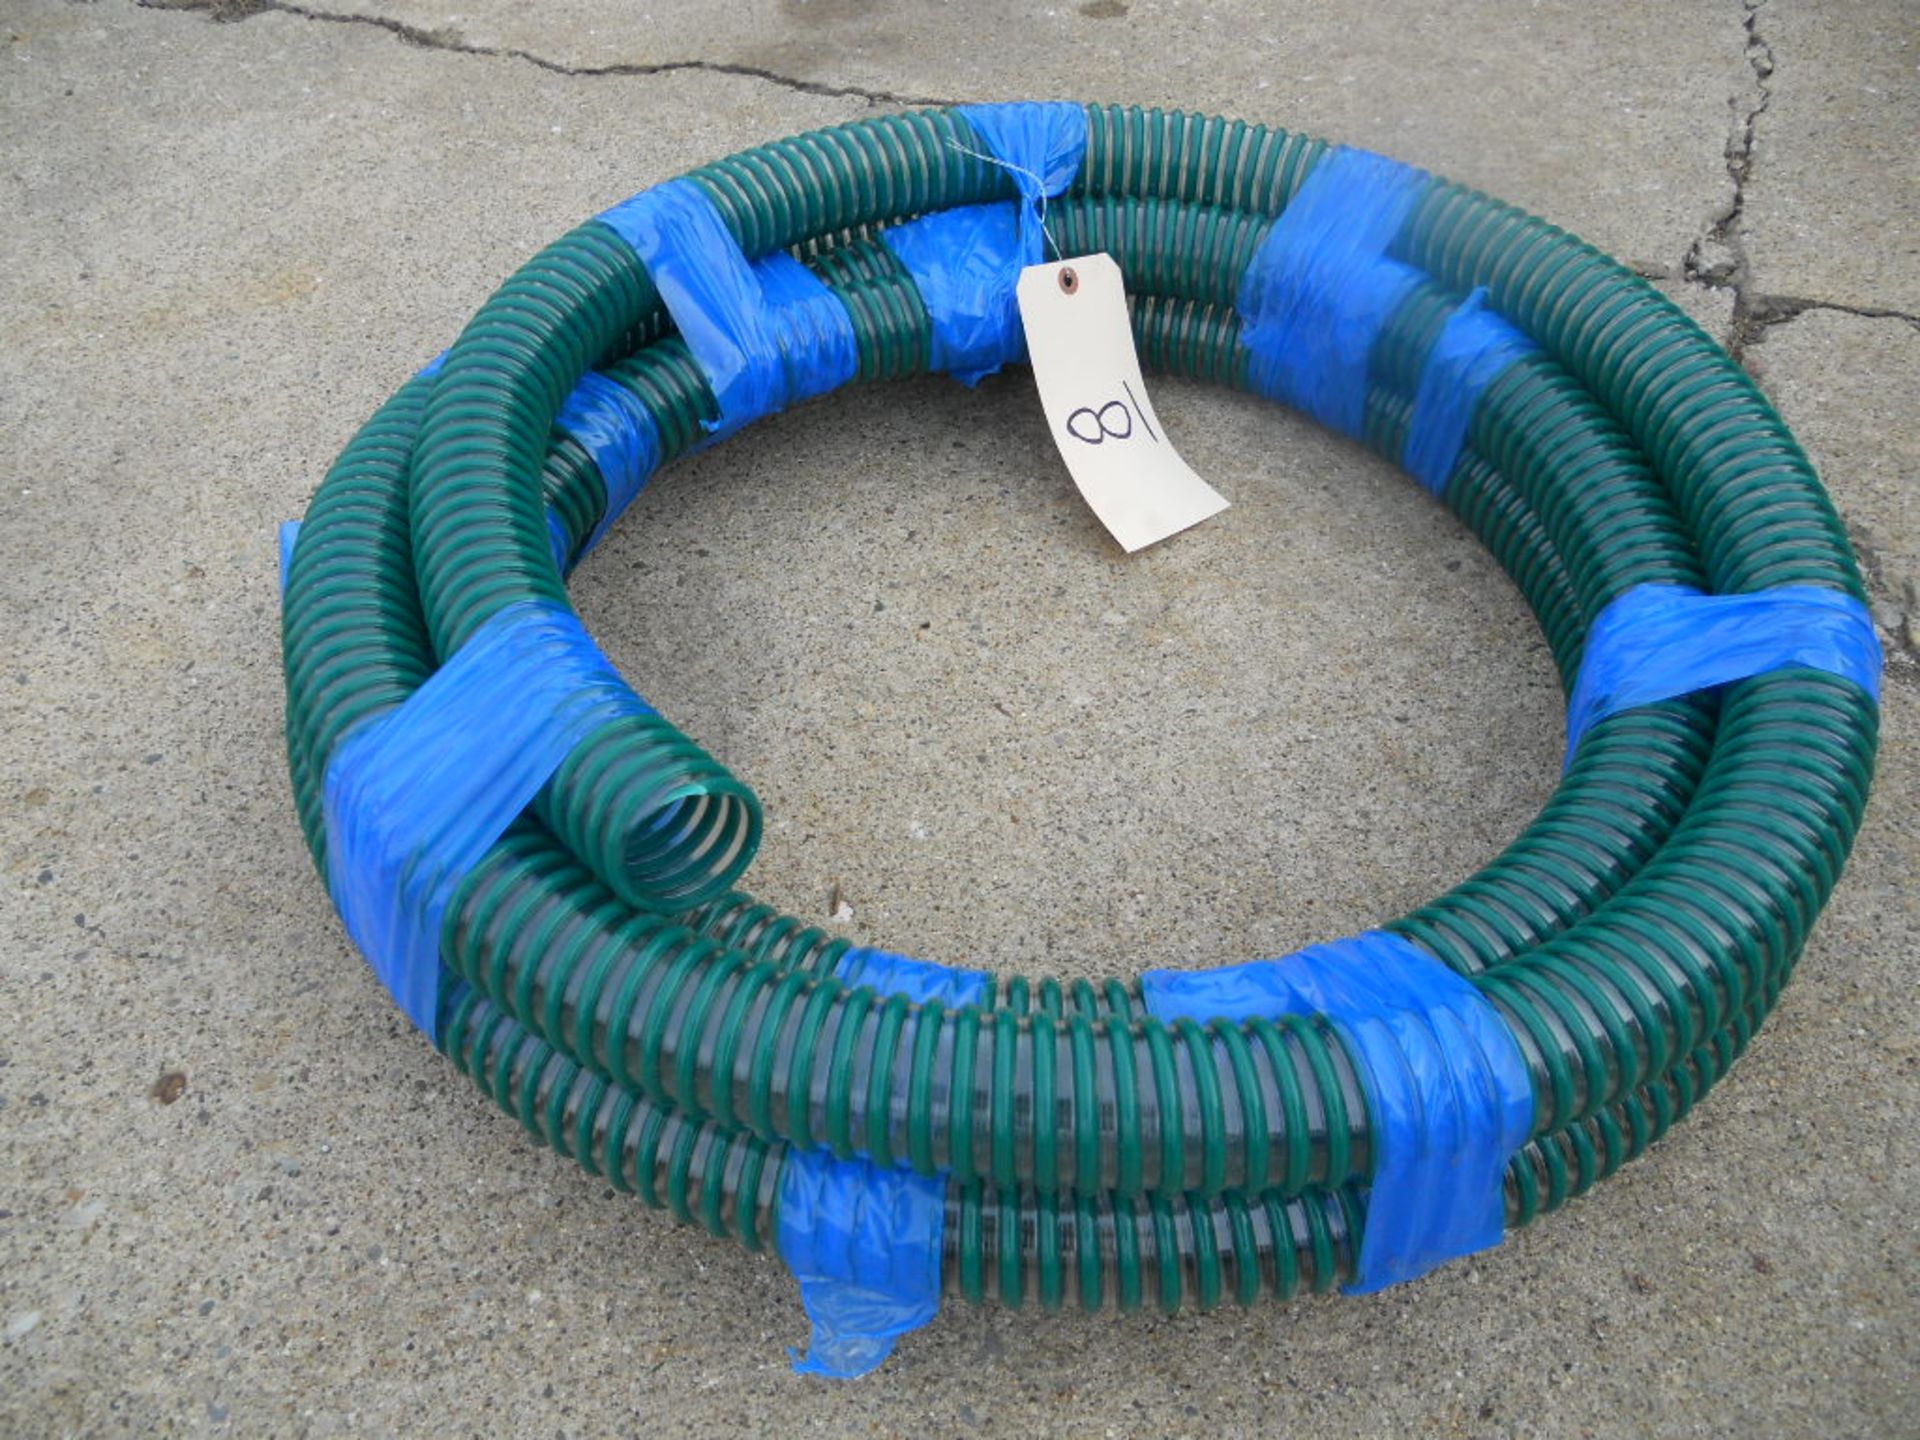 25 ft. of 1-3/4" ID Flex Aircraft Hose for Air Intake, Vacuum or Pump Water Input. New, Never Used - Image 2 of 2